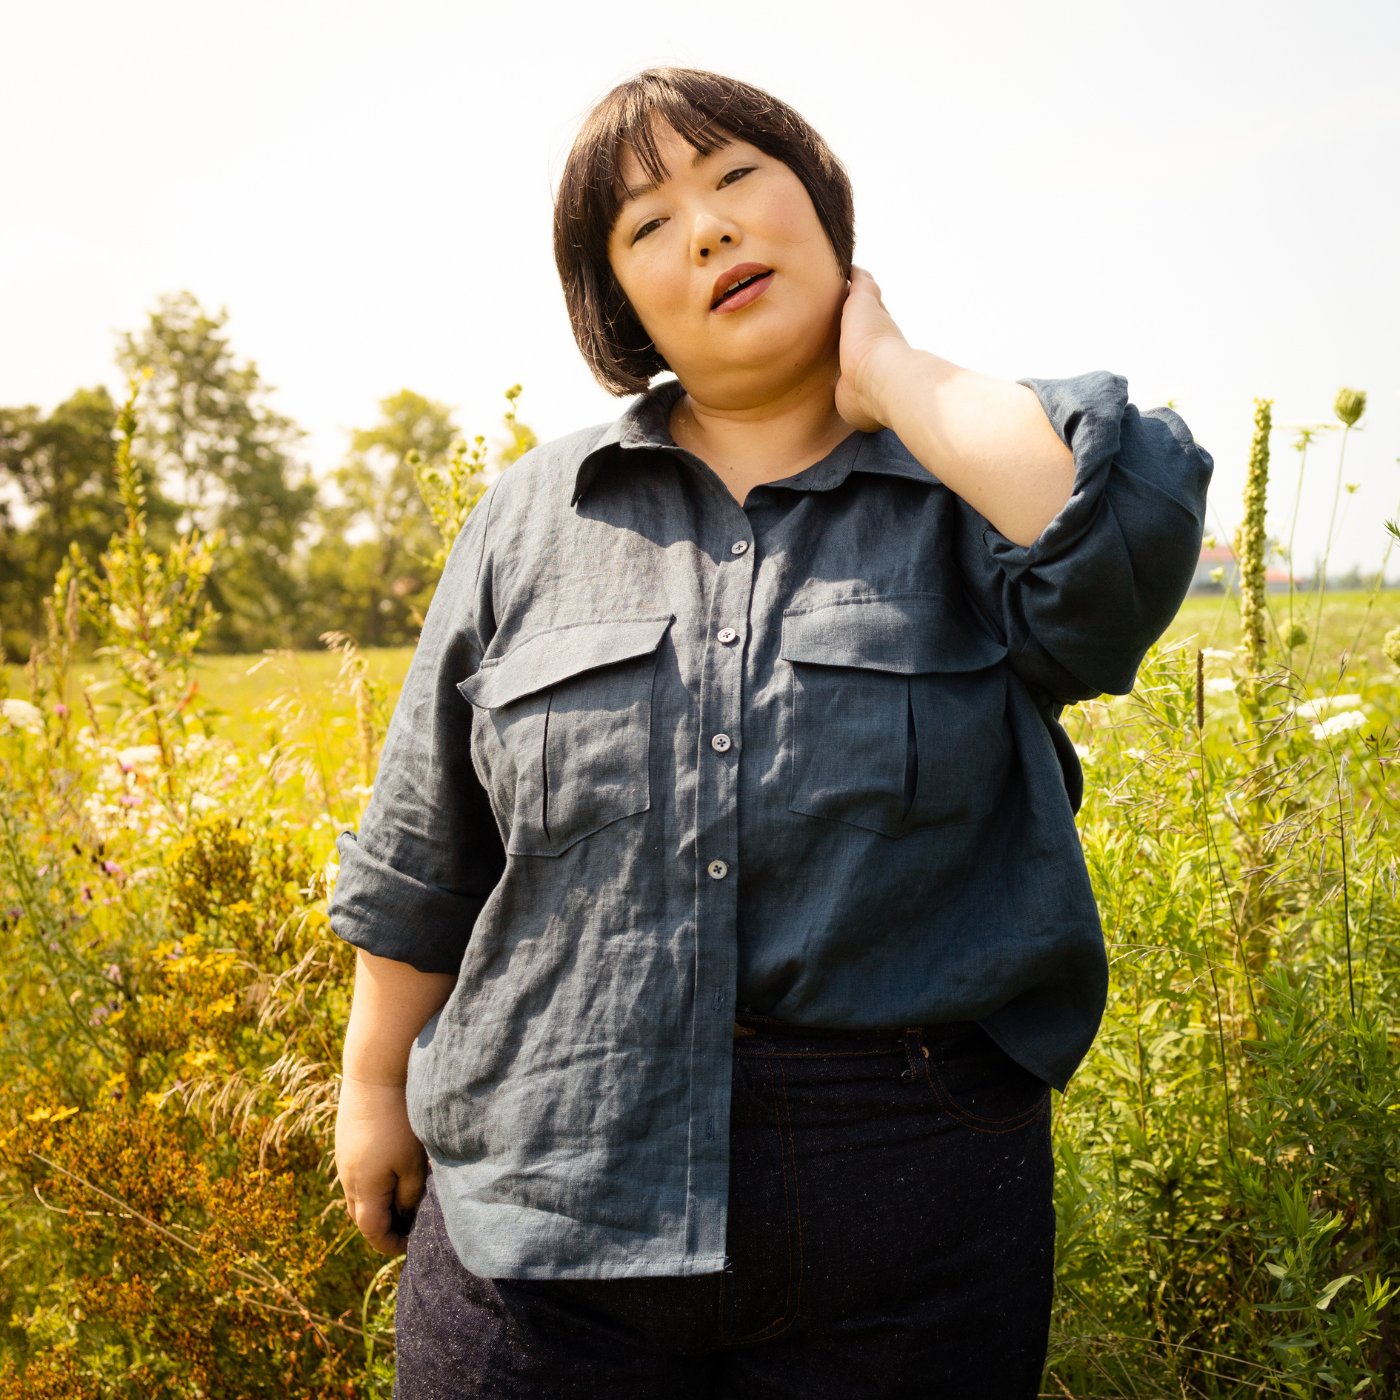 Leila stands in a field around tall small white flowers. She is holding her right hand up to her face and wears a long-sleeved button up shirt with the sleeves rolled up and black pants.